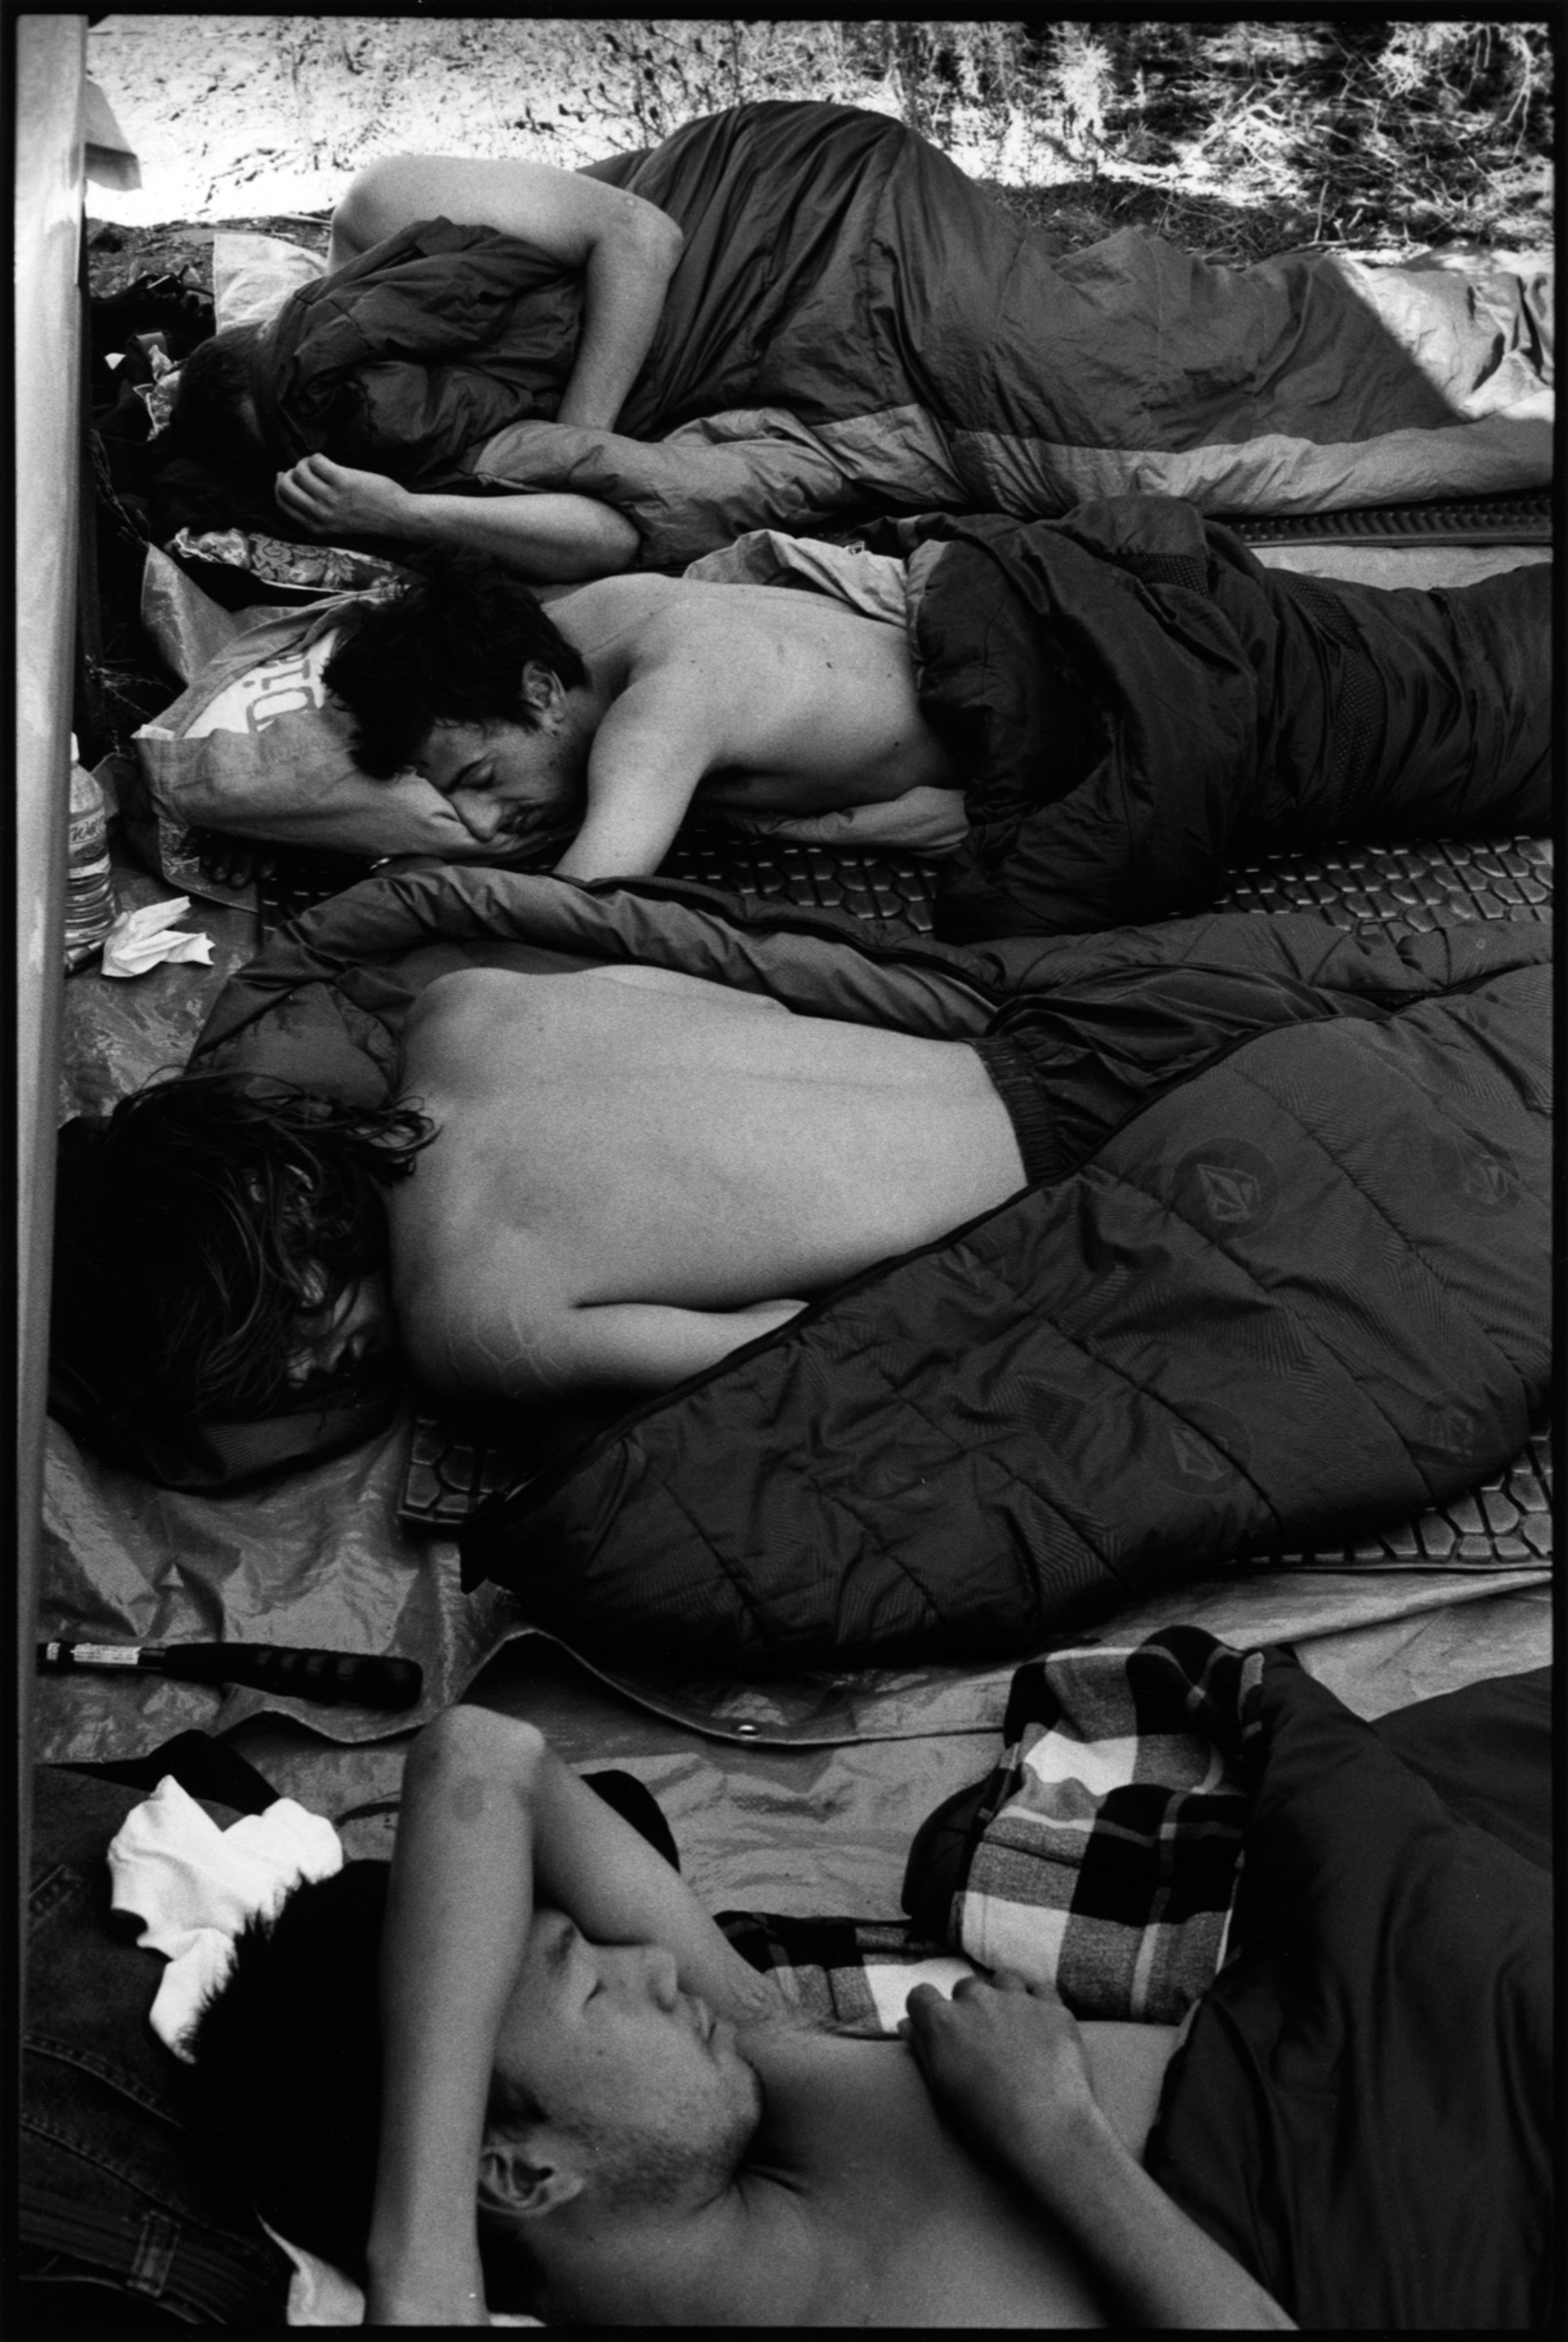 Ed Templeton, Skaters Sleep Outside New Mexico, 2008. Courtesy of the artist and Roberts Projects, Los Angeles.